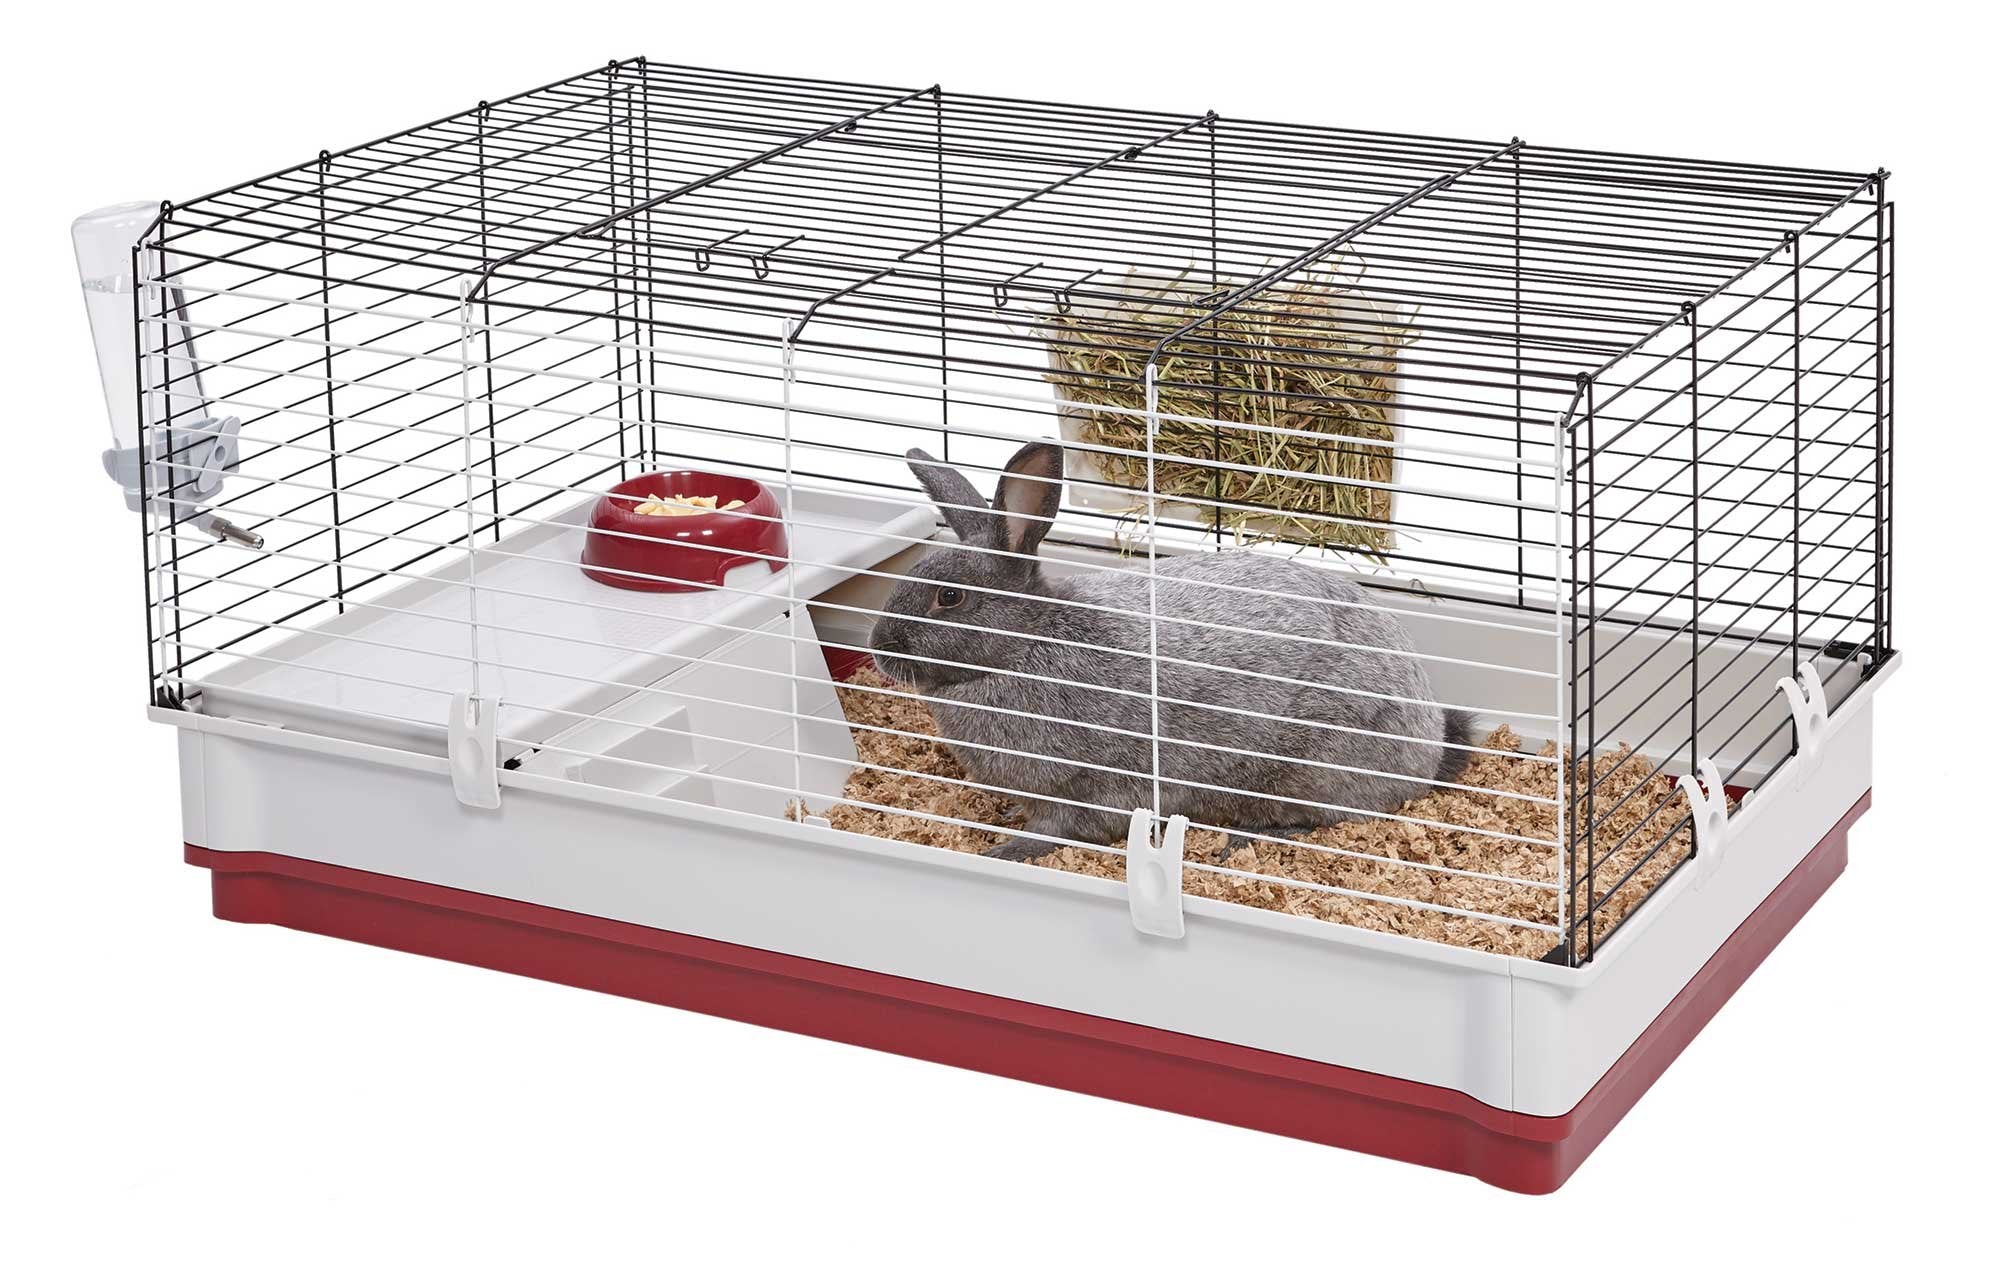 Midwest Wabbitat Deluxe Rabbit and Small Animal Home - X-Large - 47" X 23.6" X 19.7" Inches  